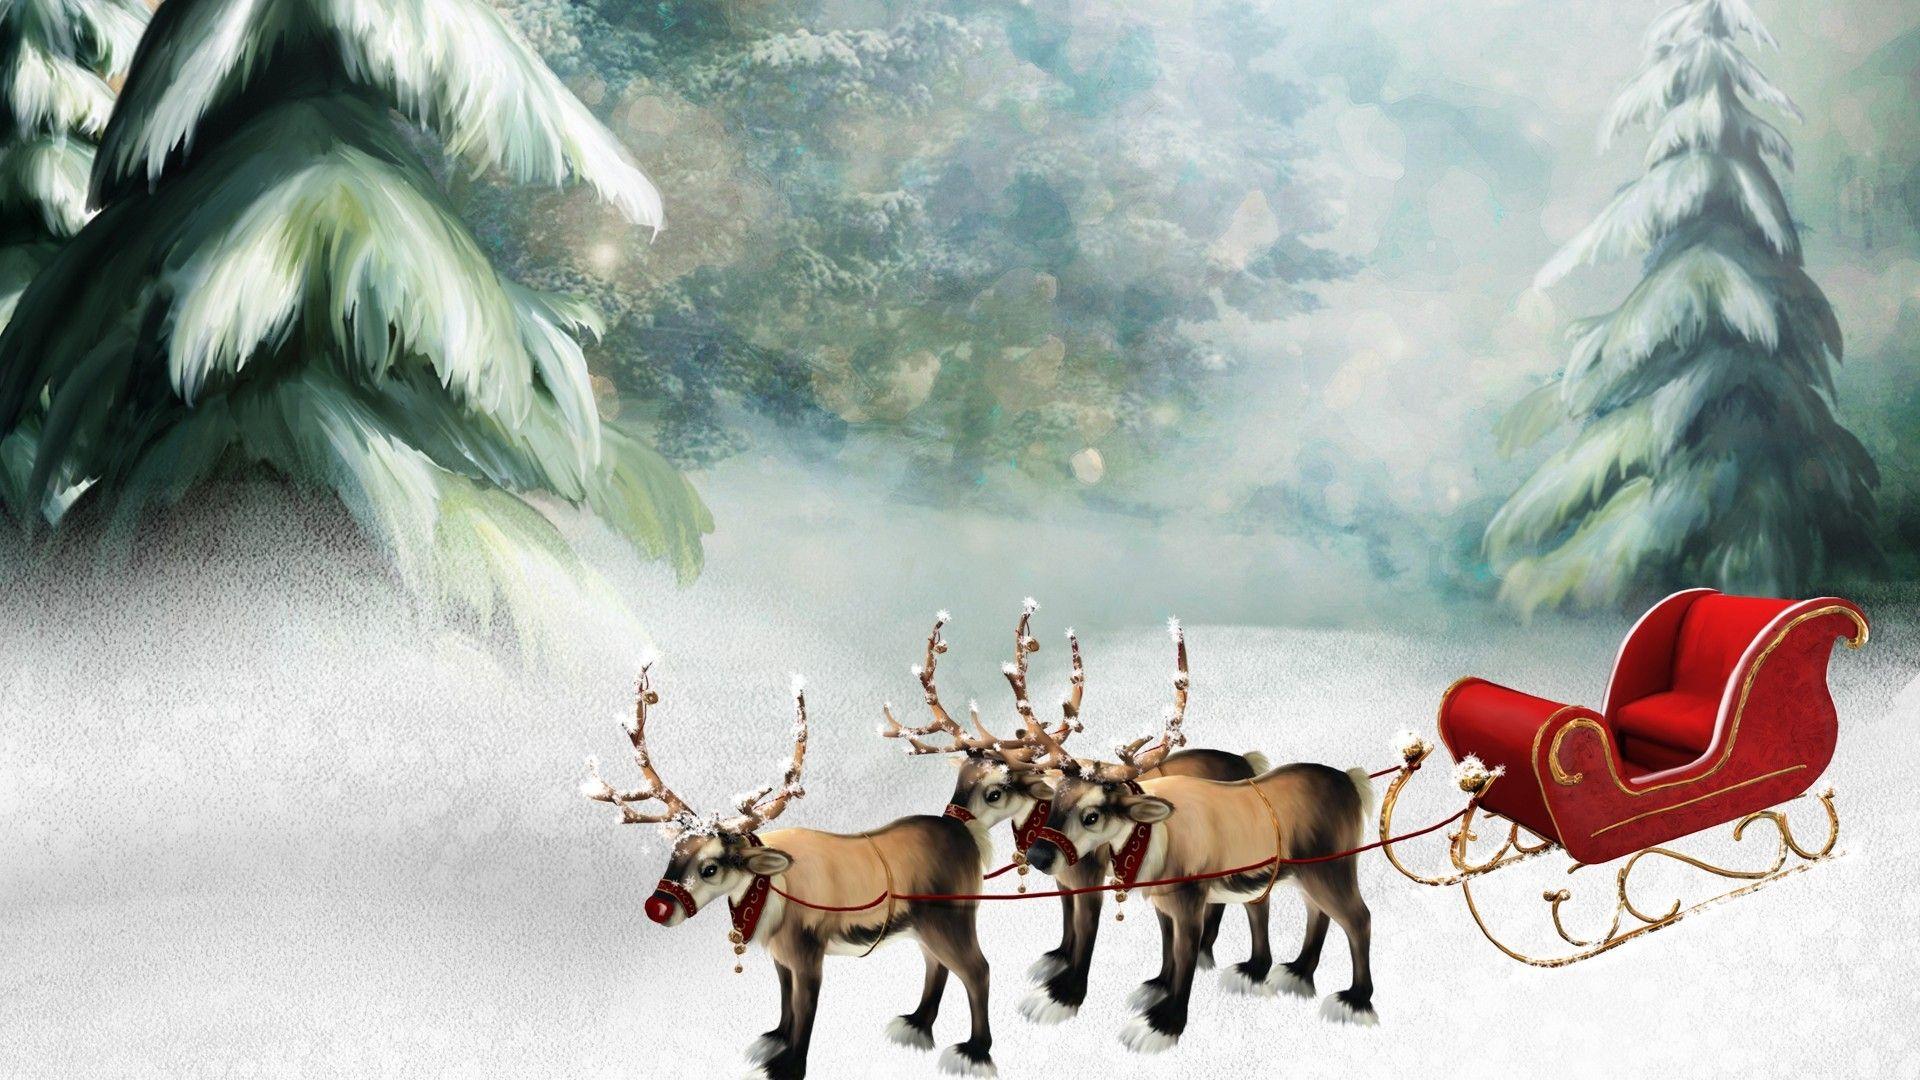 Decorated Santa's Sleigh Wallpaper For Mobile and Desktop In HD